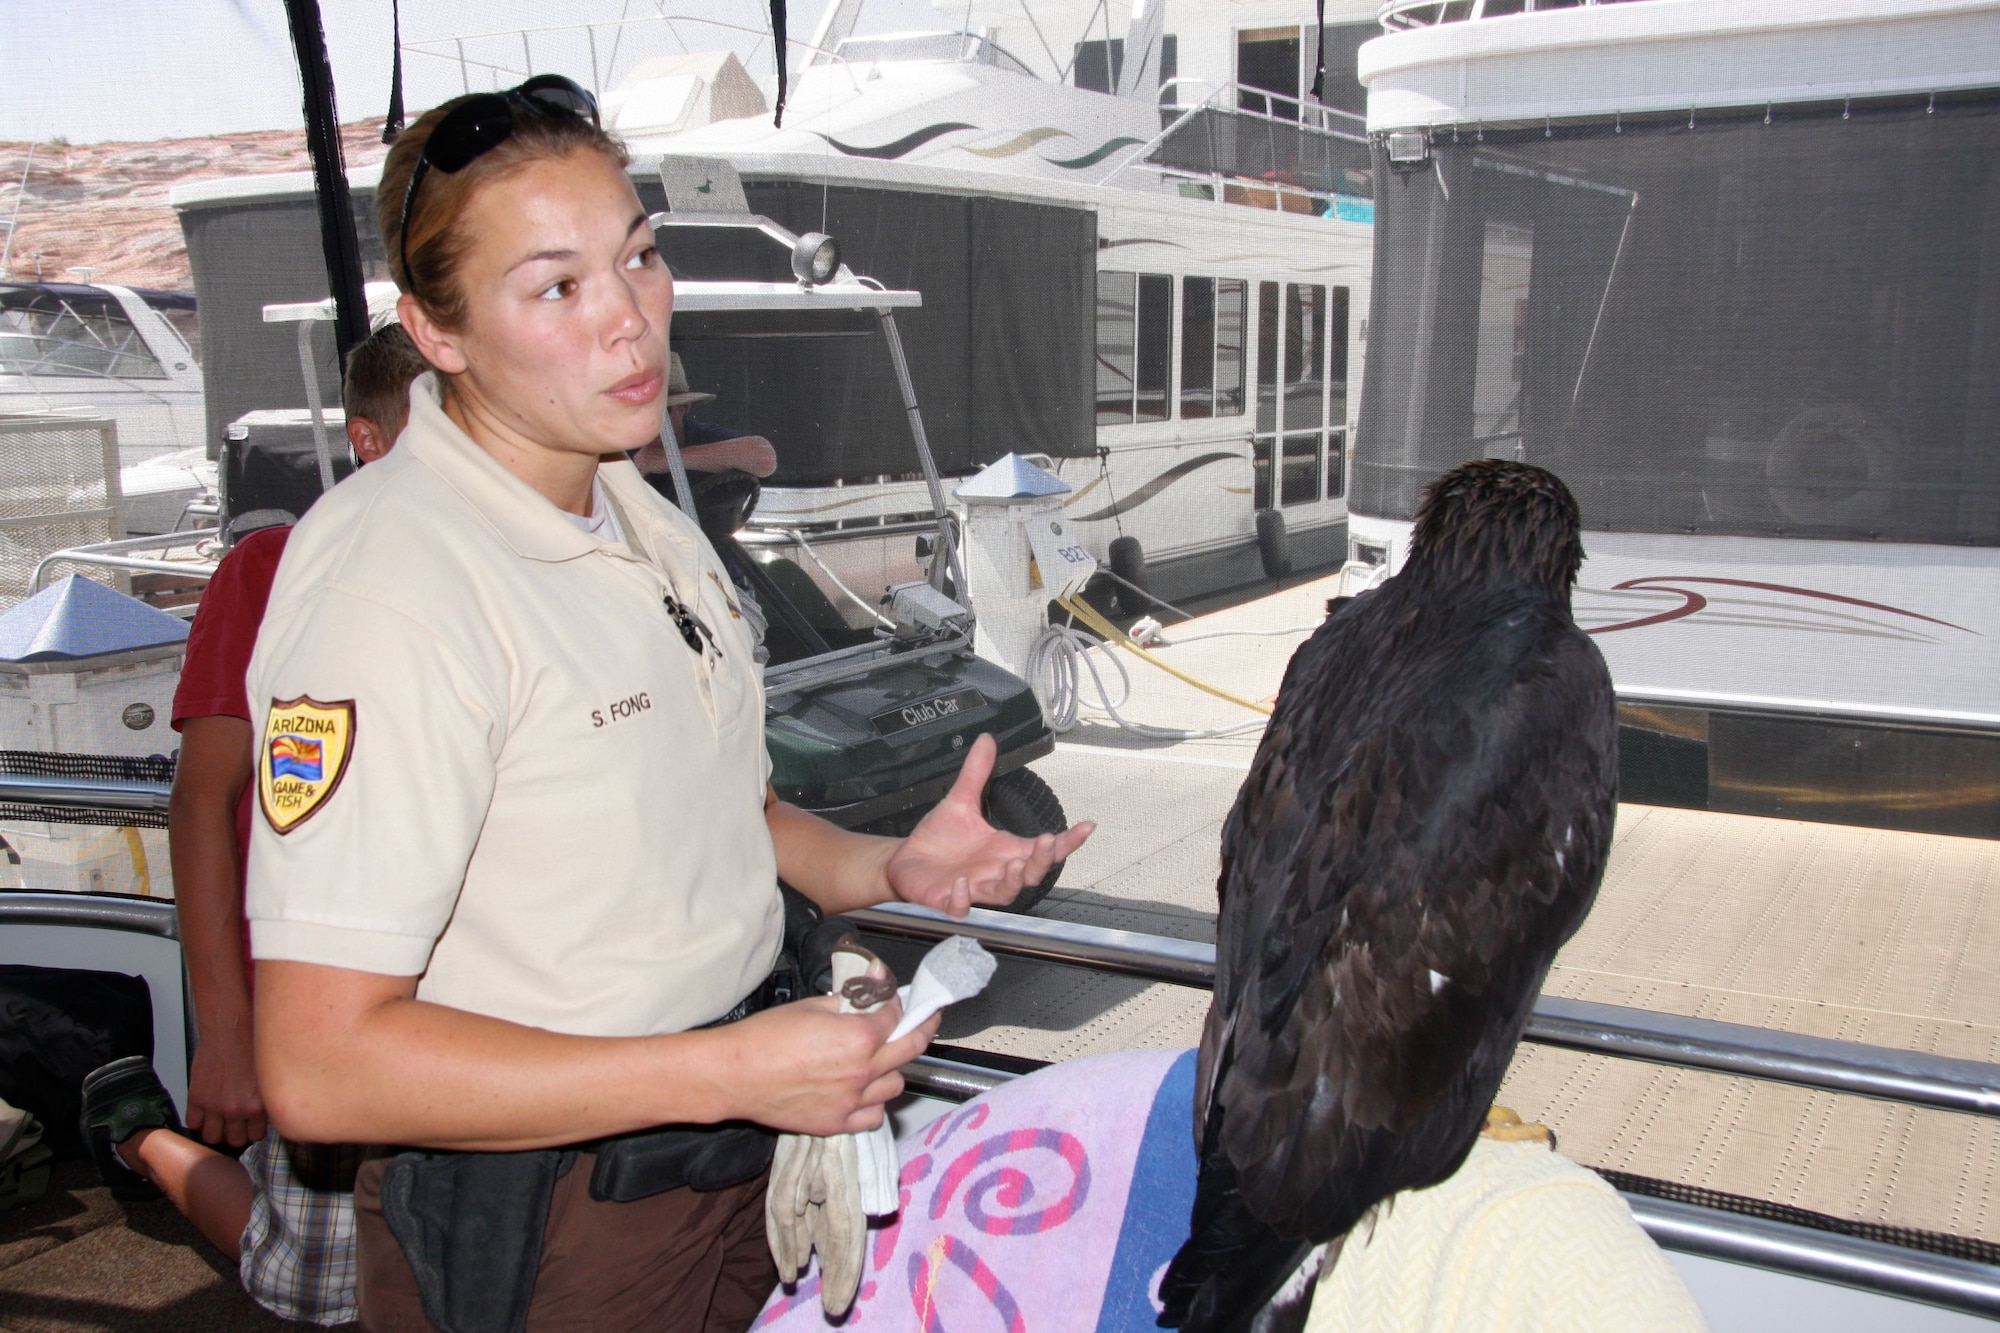 Sophia Fong, Arizona Game and Fish department manager, discusses Cliff's rescue and projected rehabilitation with the rescue team.